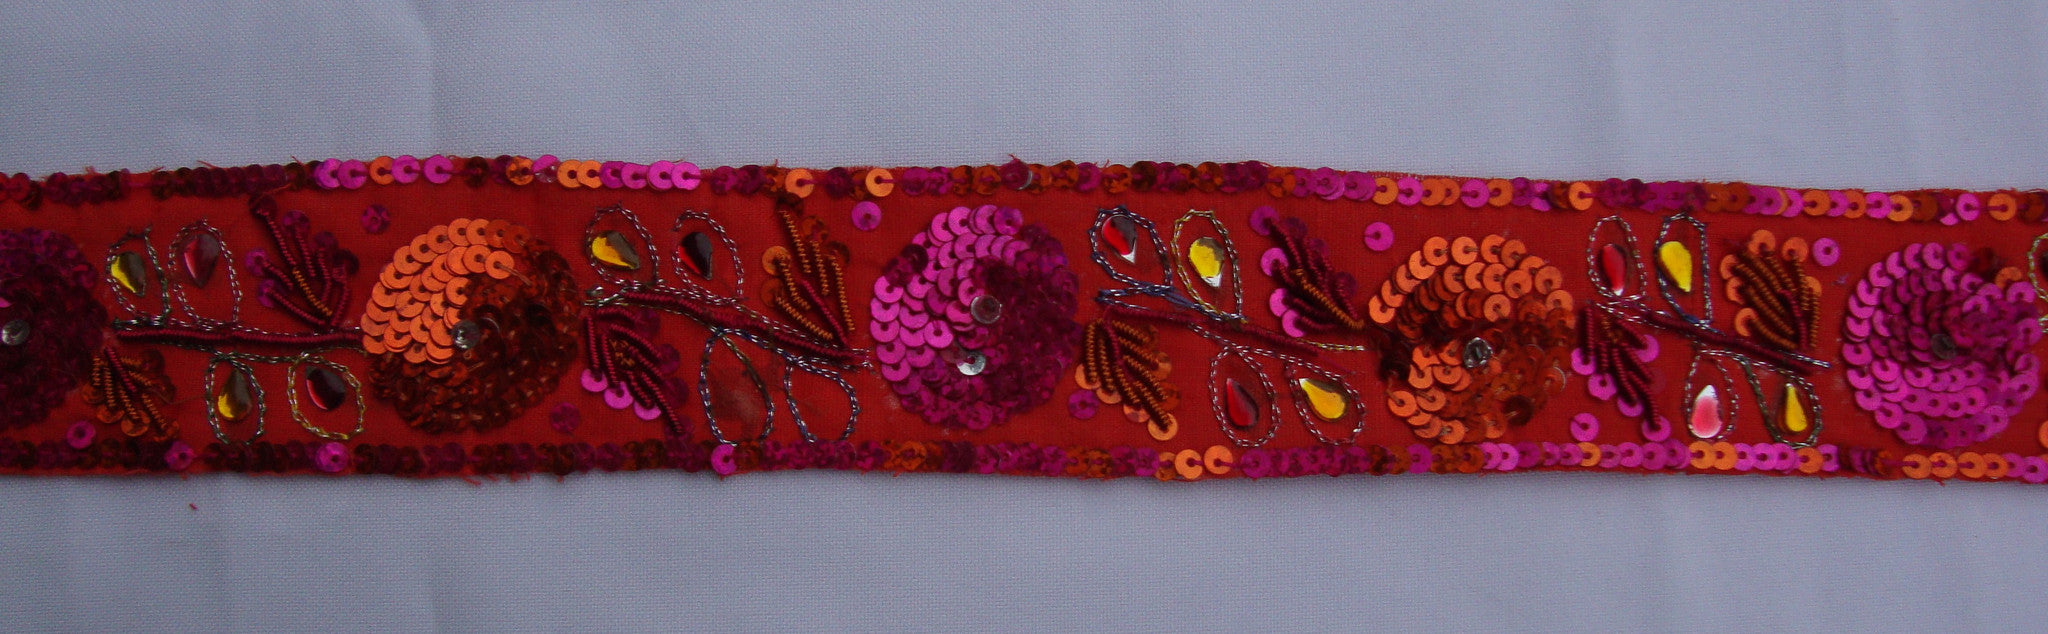 Orange & Fuchsia Sequined Trimming (Sold as a 2.5 yard piece)